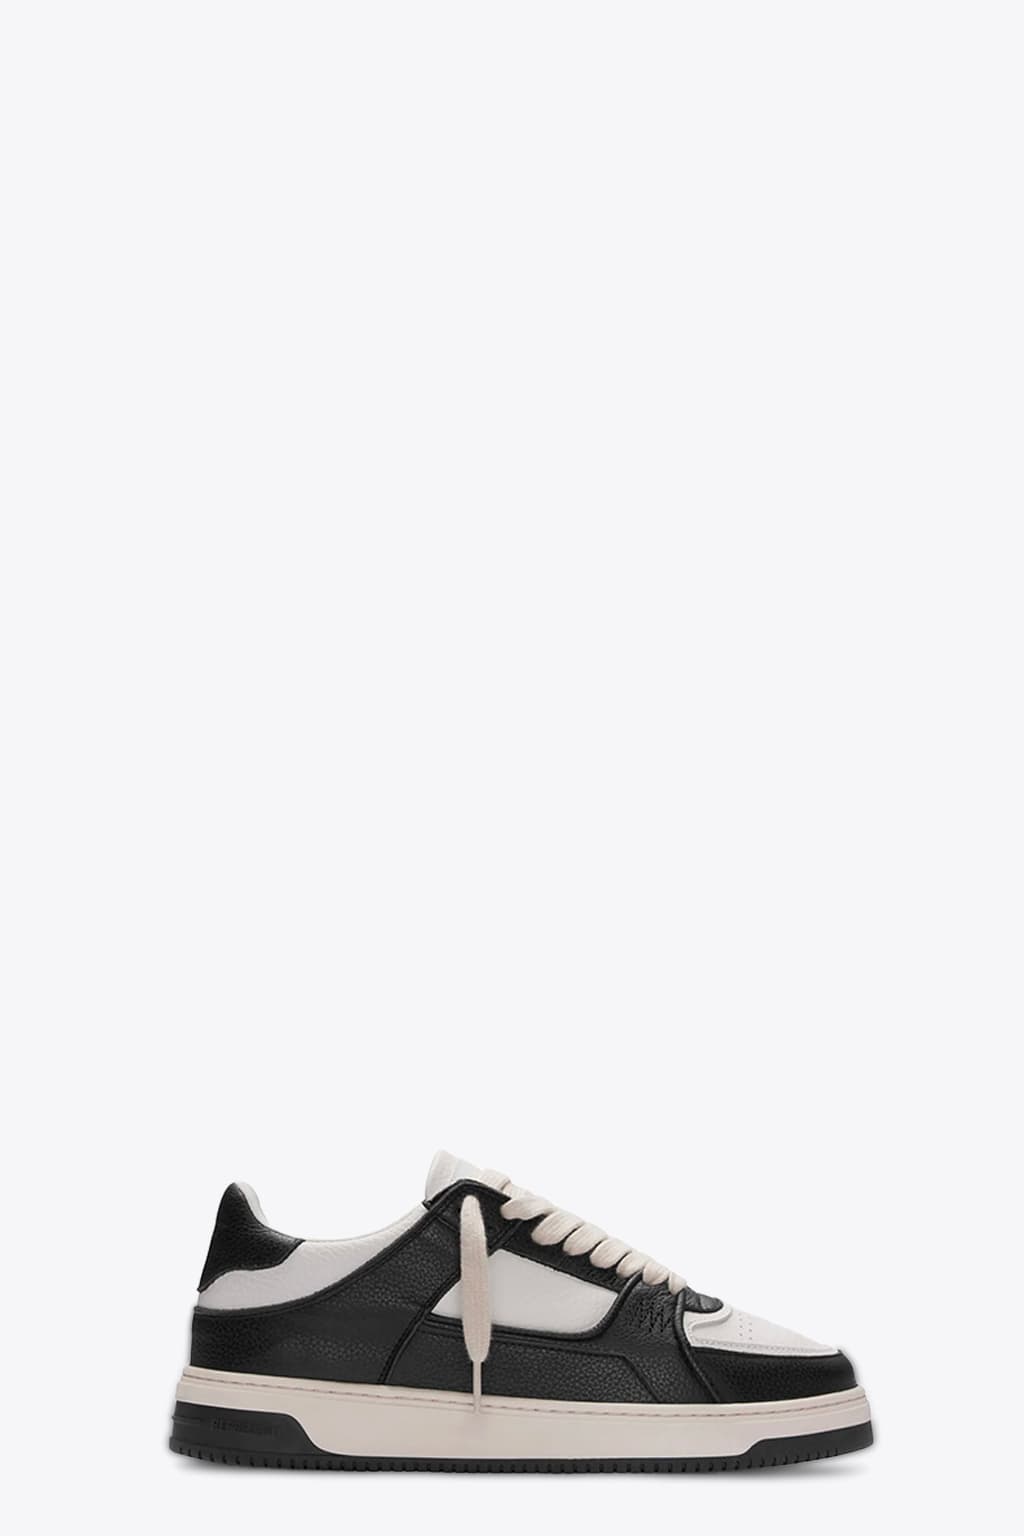 Apex Off White And Black Leather Low Top Sneaker - Apex